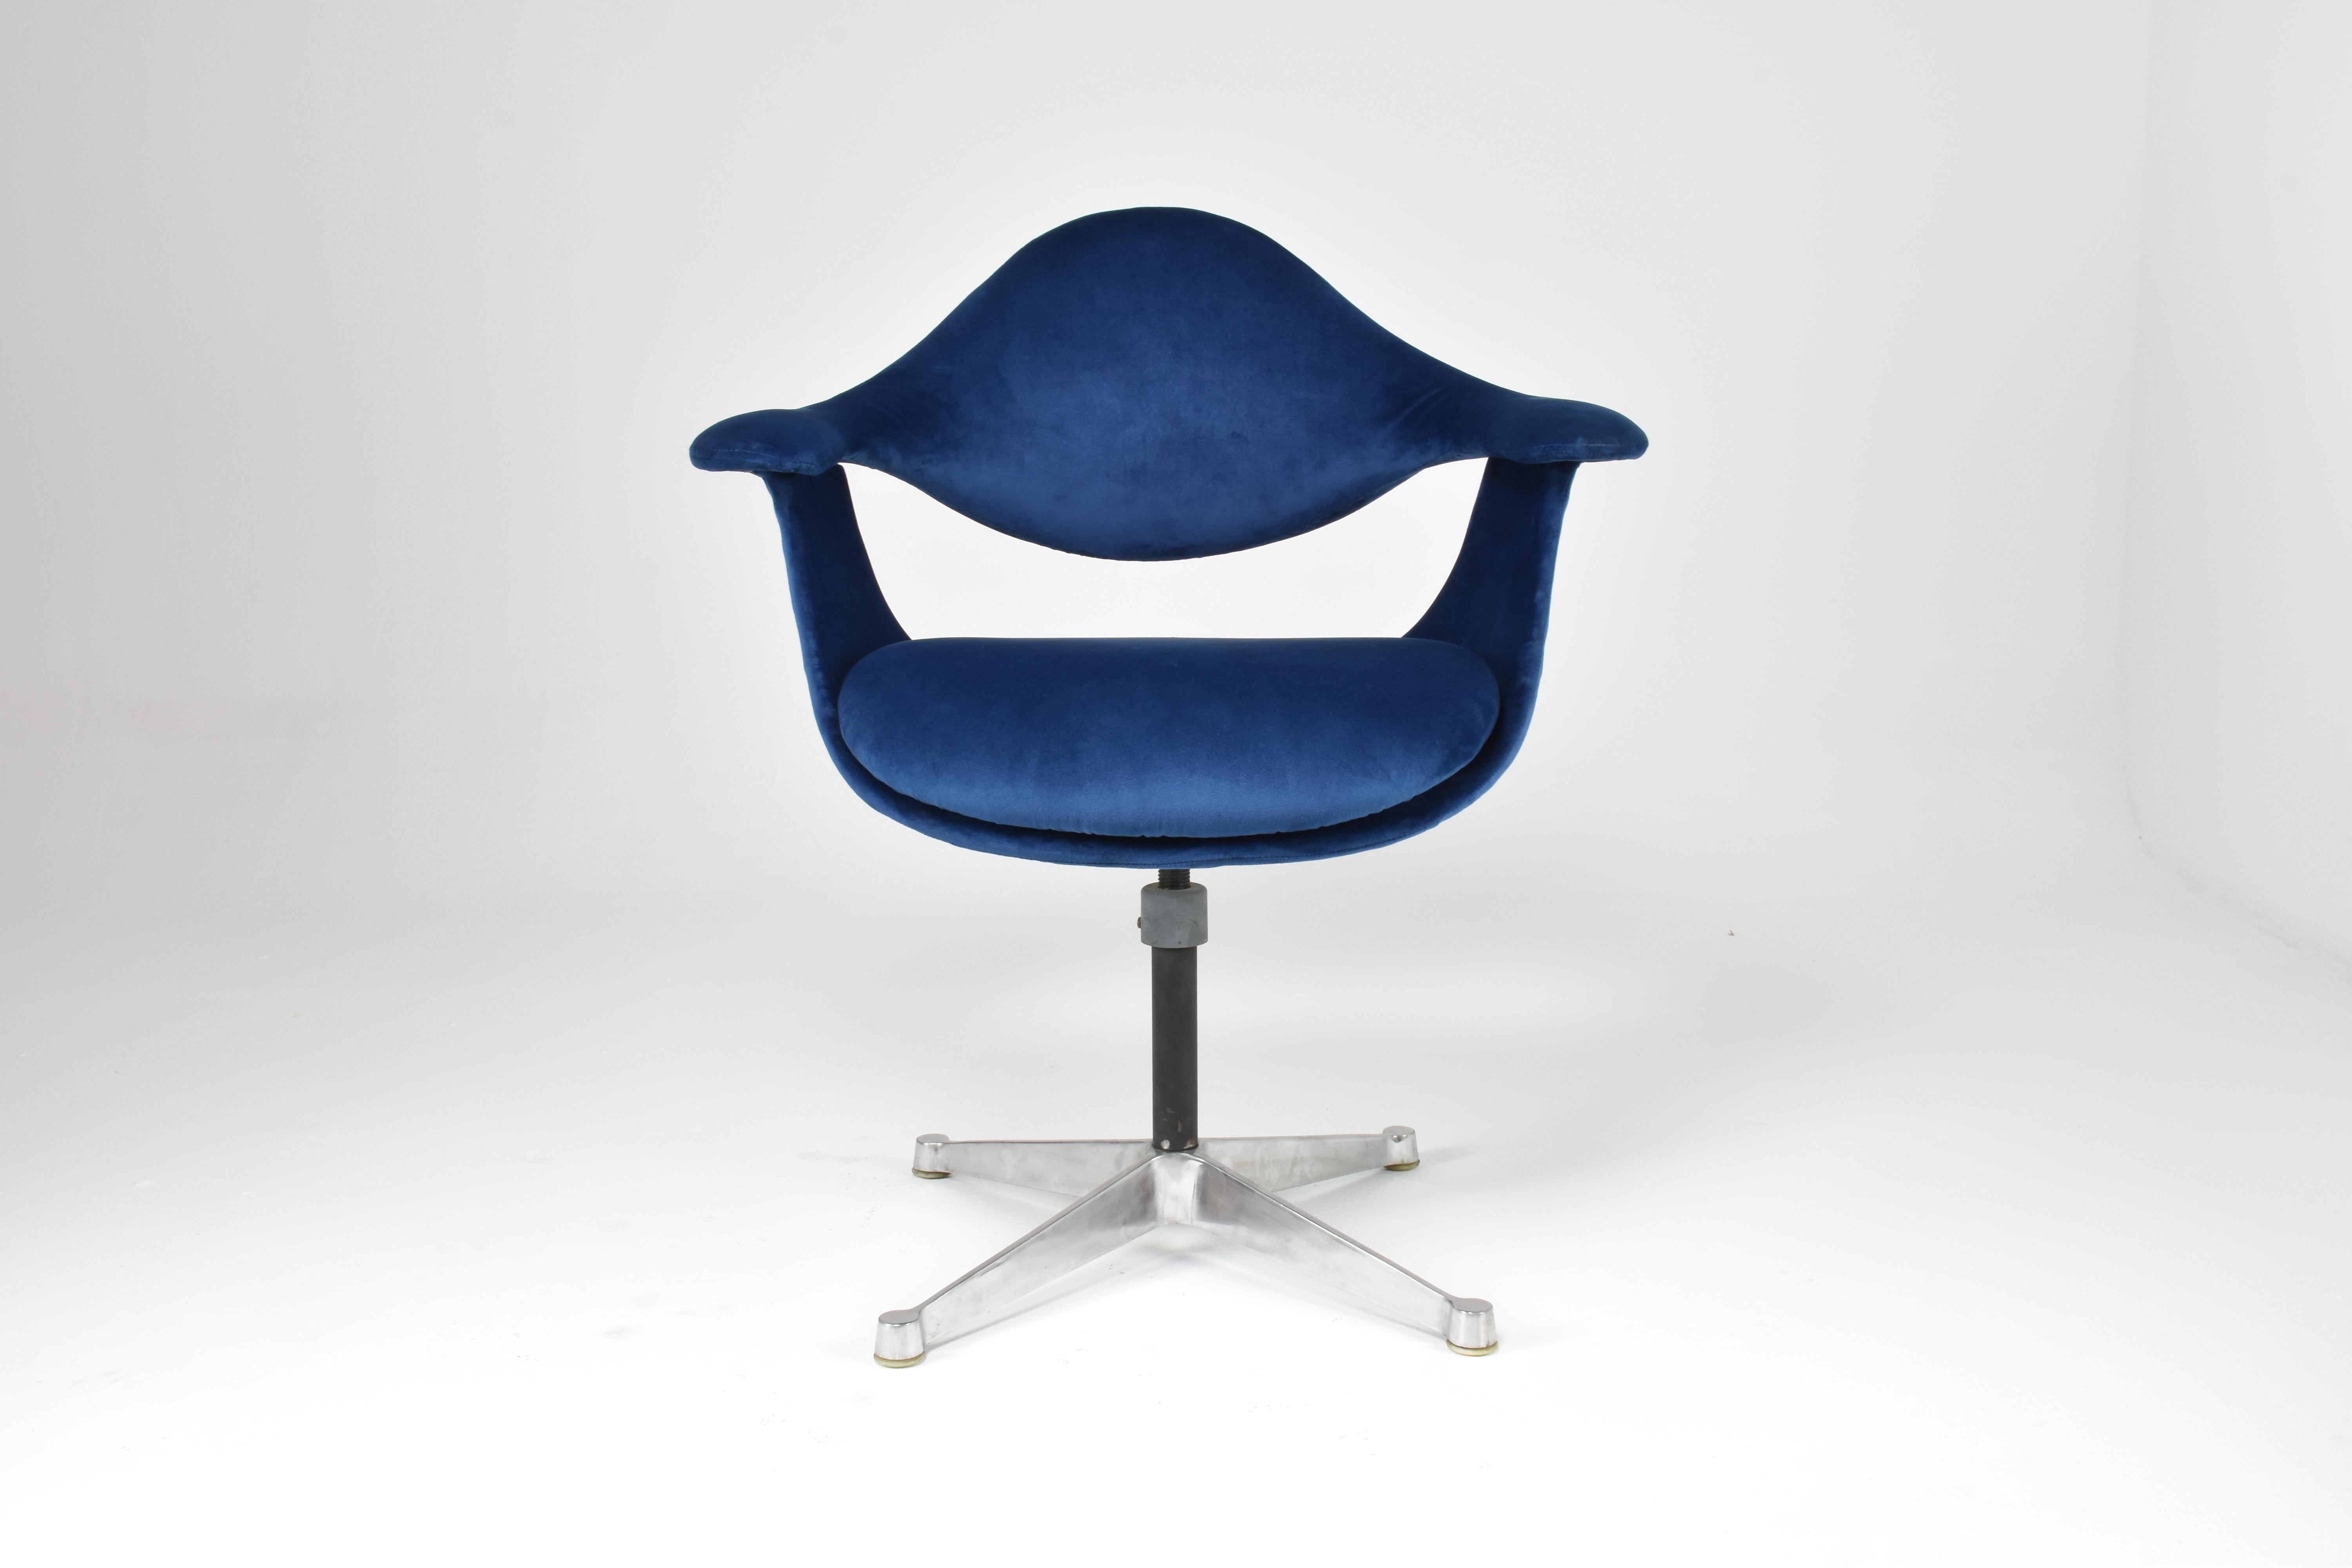 A 20th-century vintage George Nelson 'DAF' chair, design in the 1960's manufactured by ICF Cadsana in Milan. The base of the chair was designed by Charles Eames. This iconic office chair is constructed using cast aluminium and tubular steel,